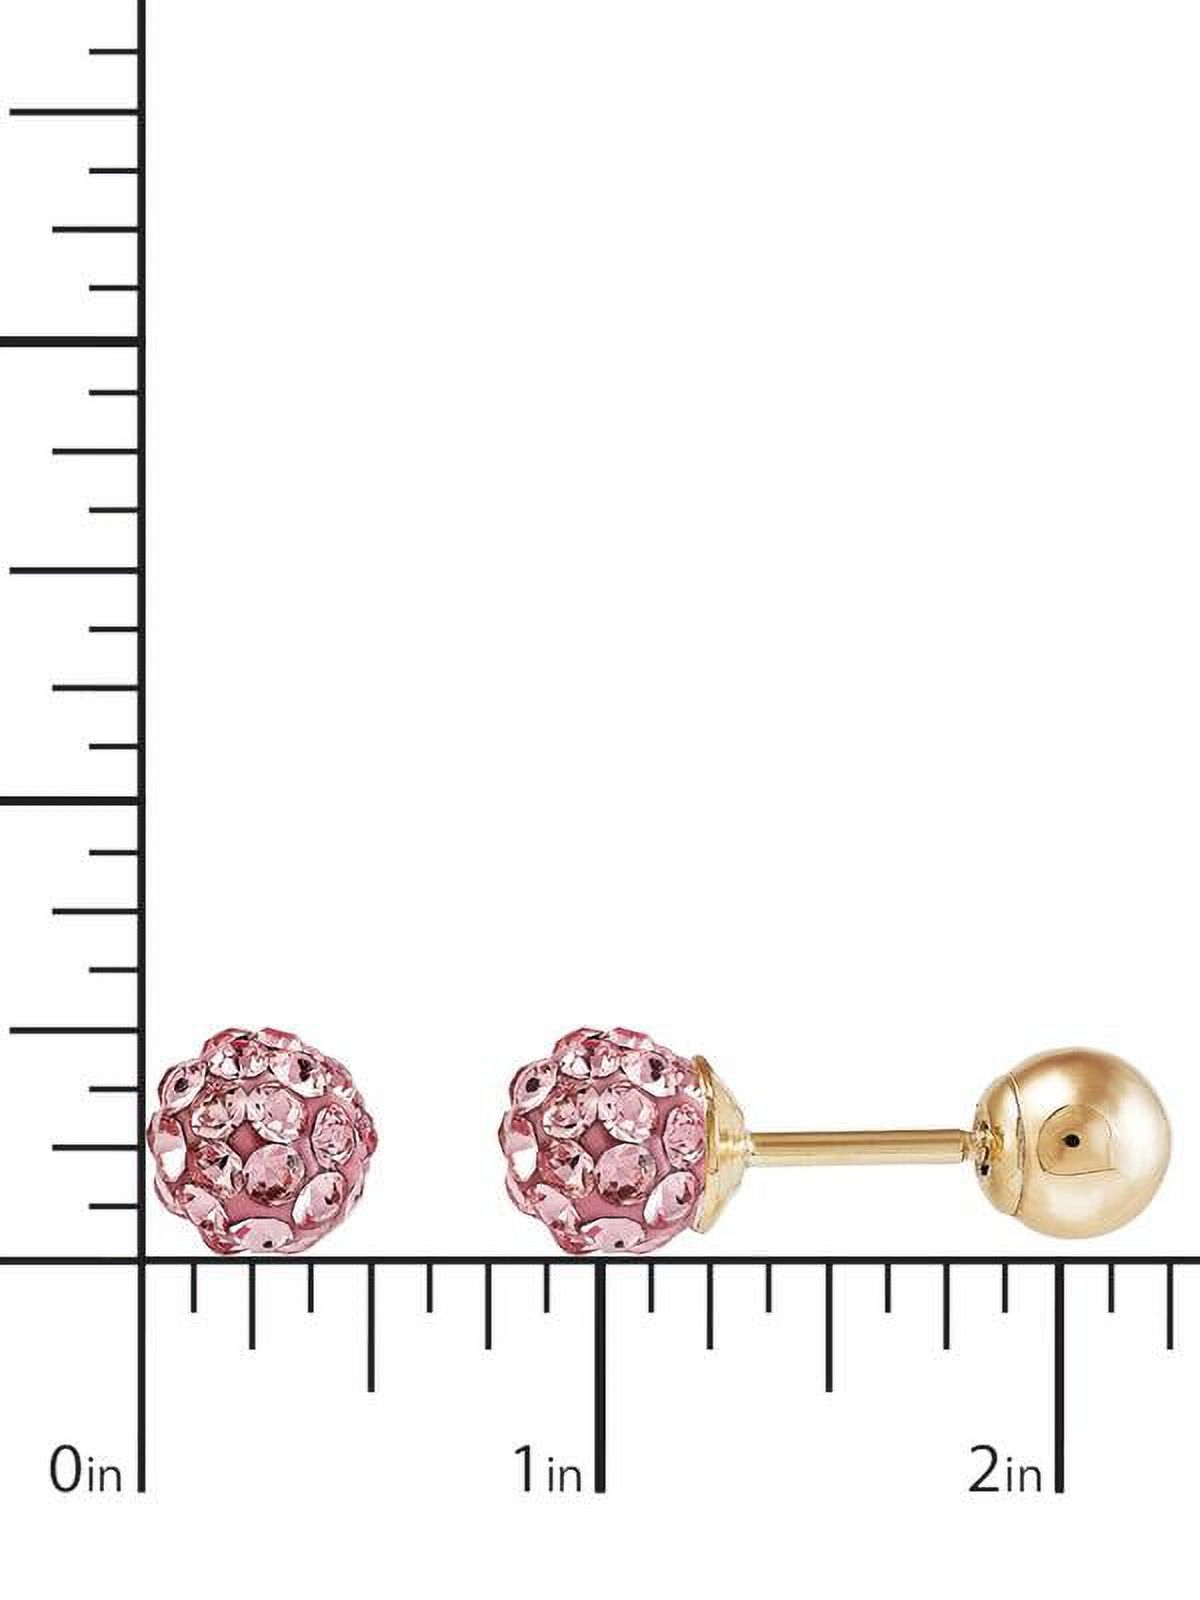 Brilliance Fine Jewelry Pink Crystals 4.8MM Studs Earrings in 10K Yellow Gold - image 5 of 10